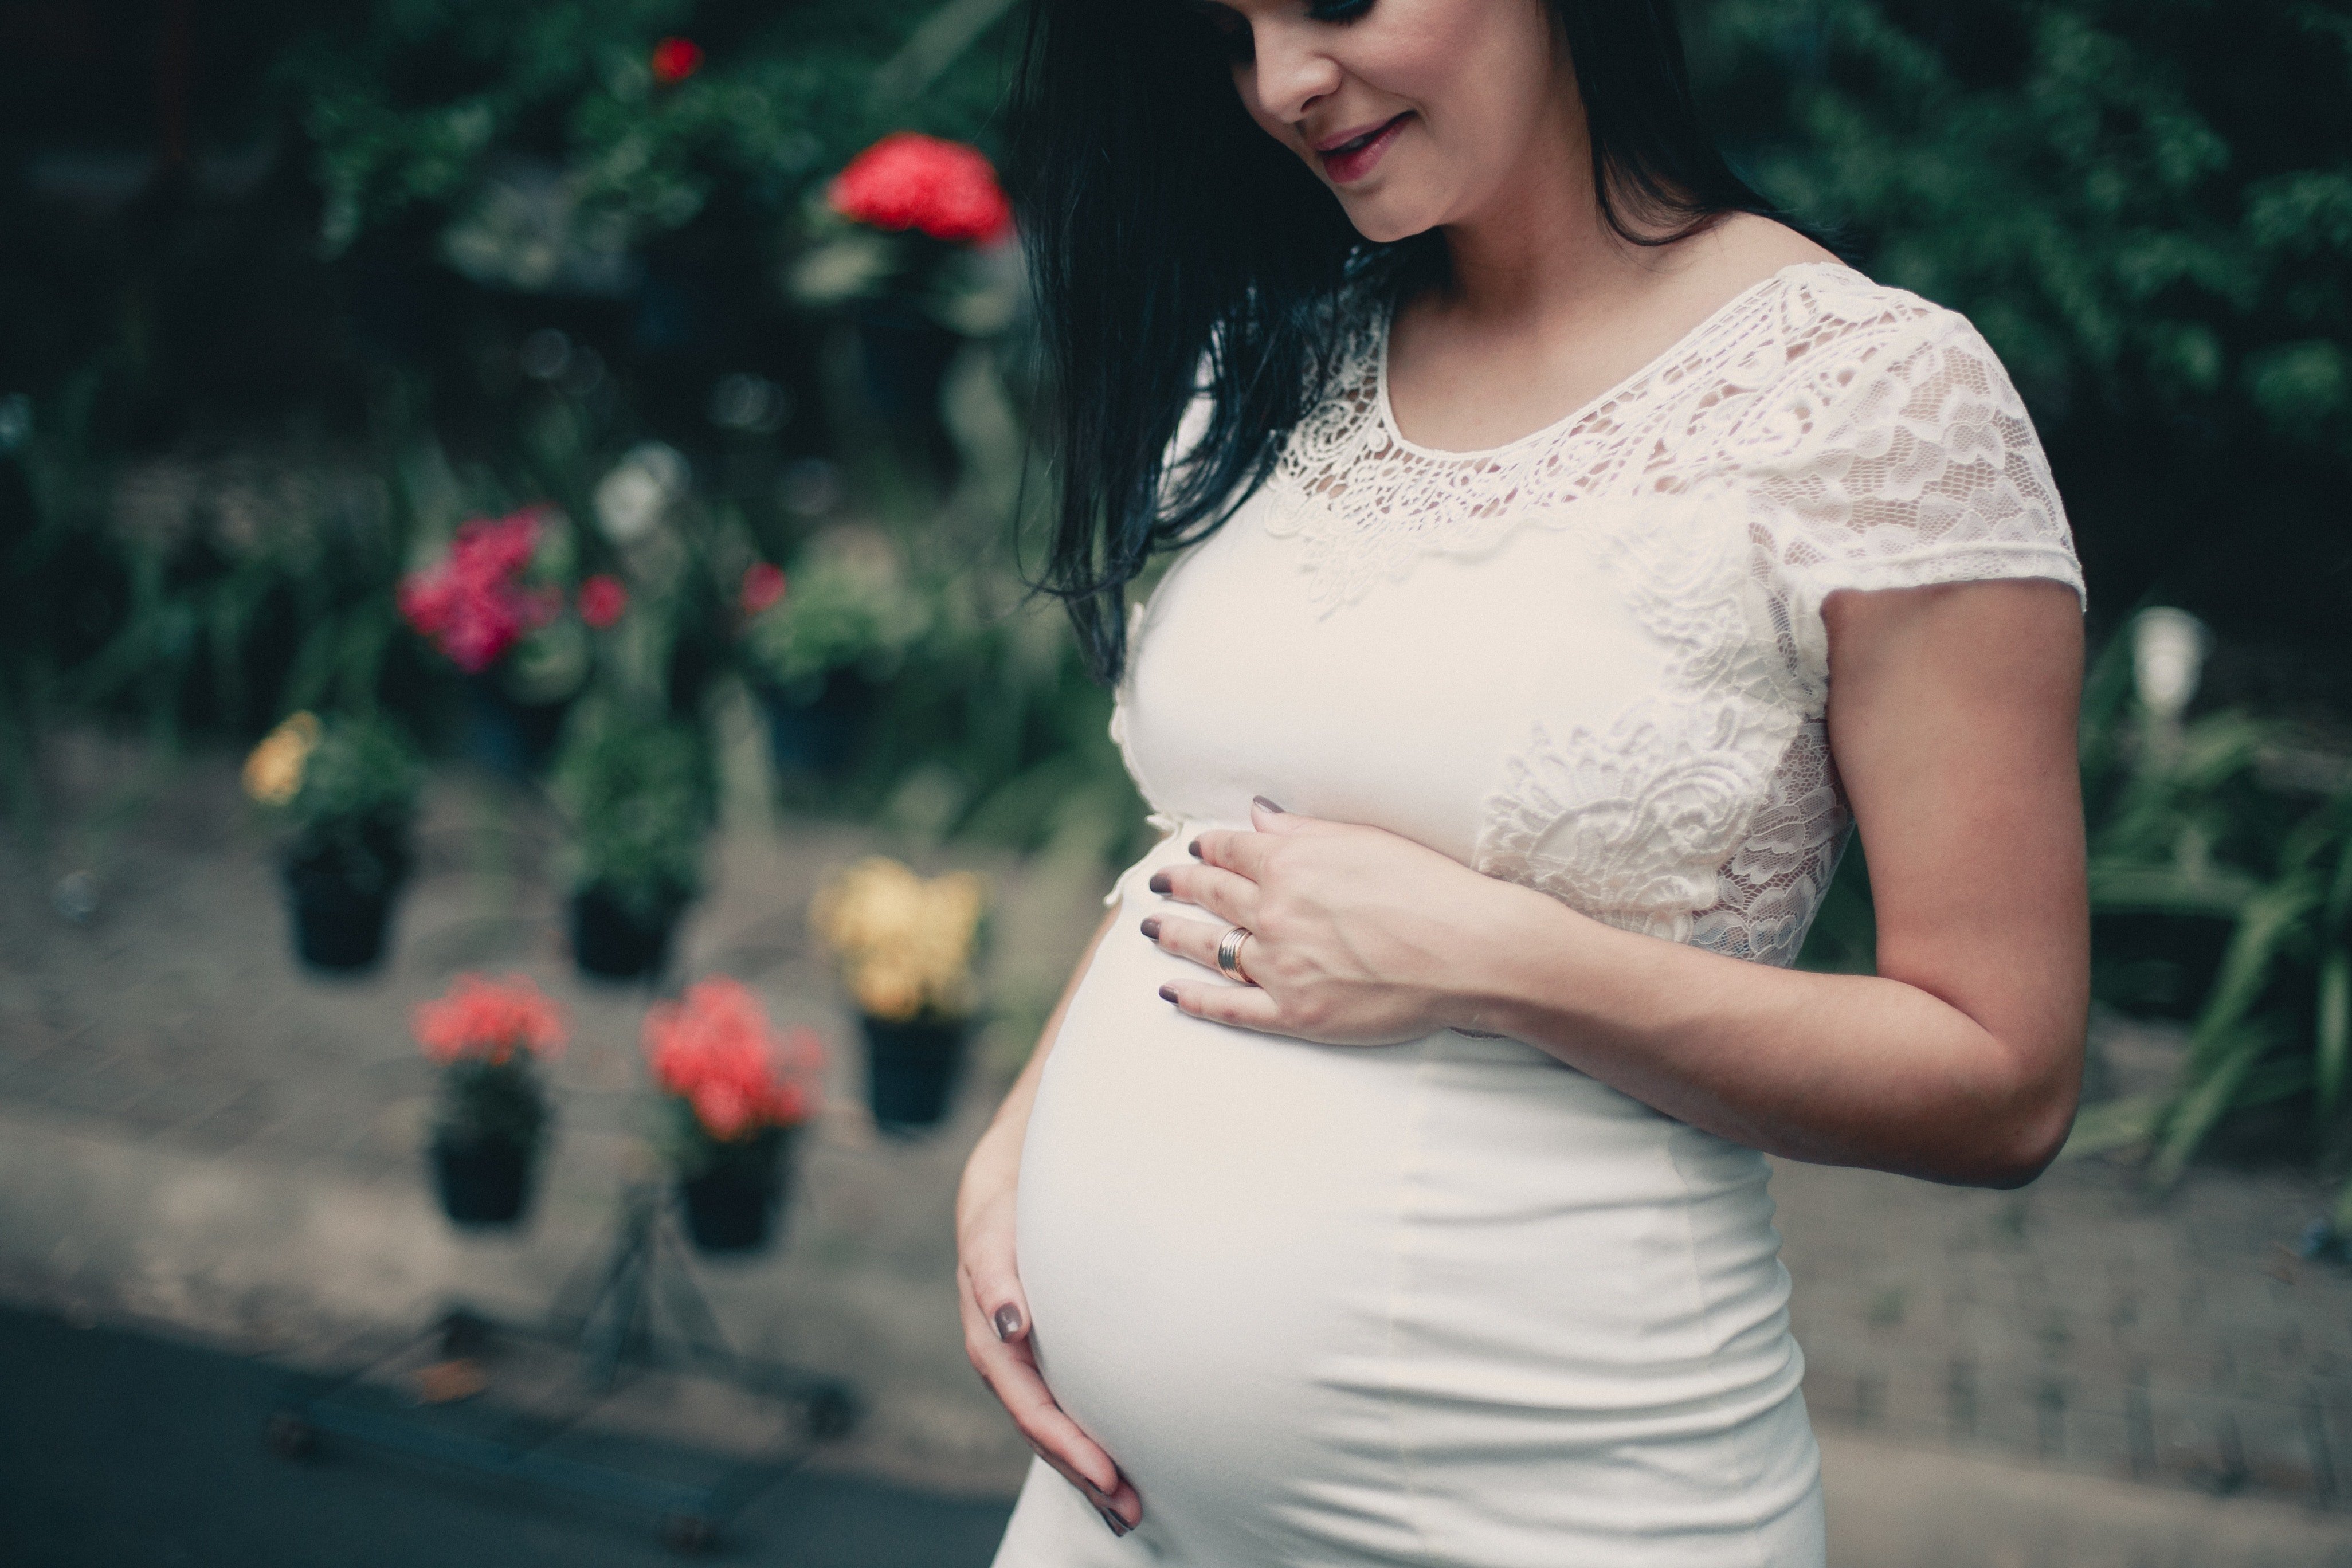 My wife tripped and fell on our broken garden path, and now she's expecting. | Photo: Pexels